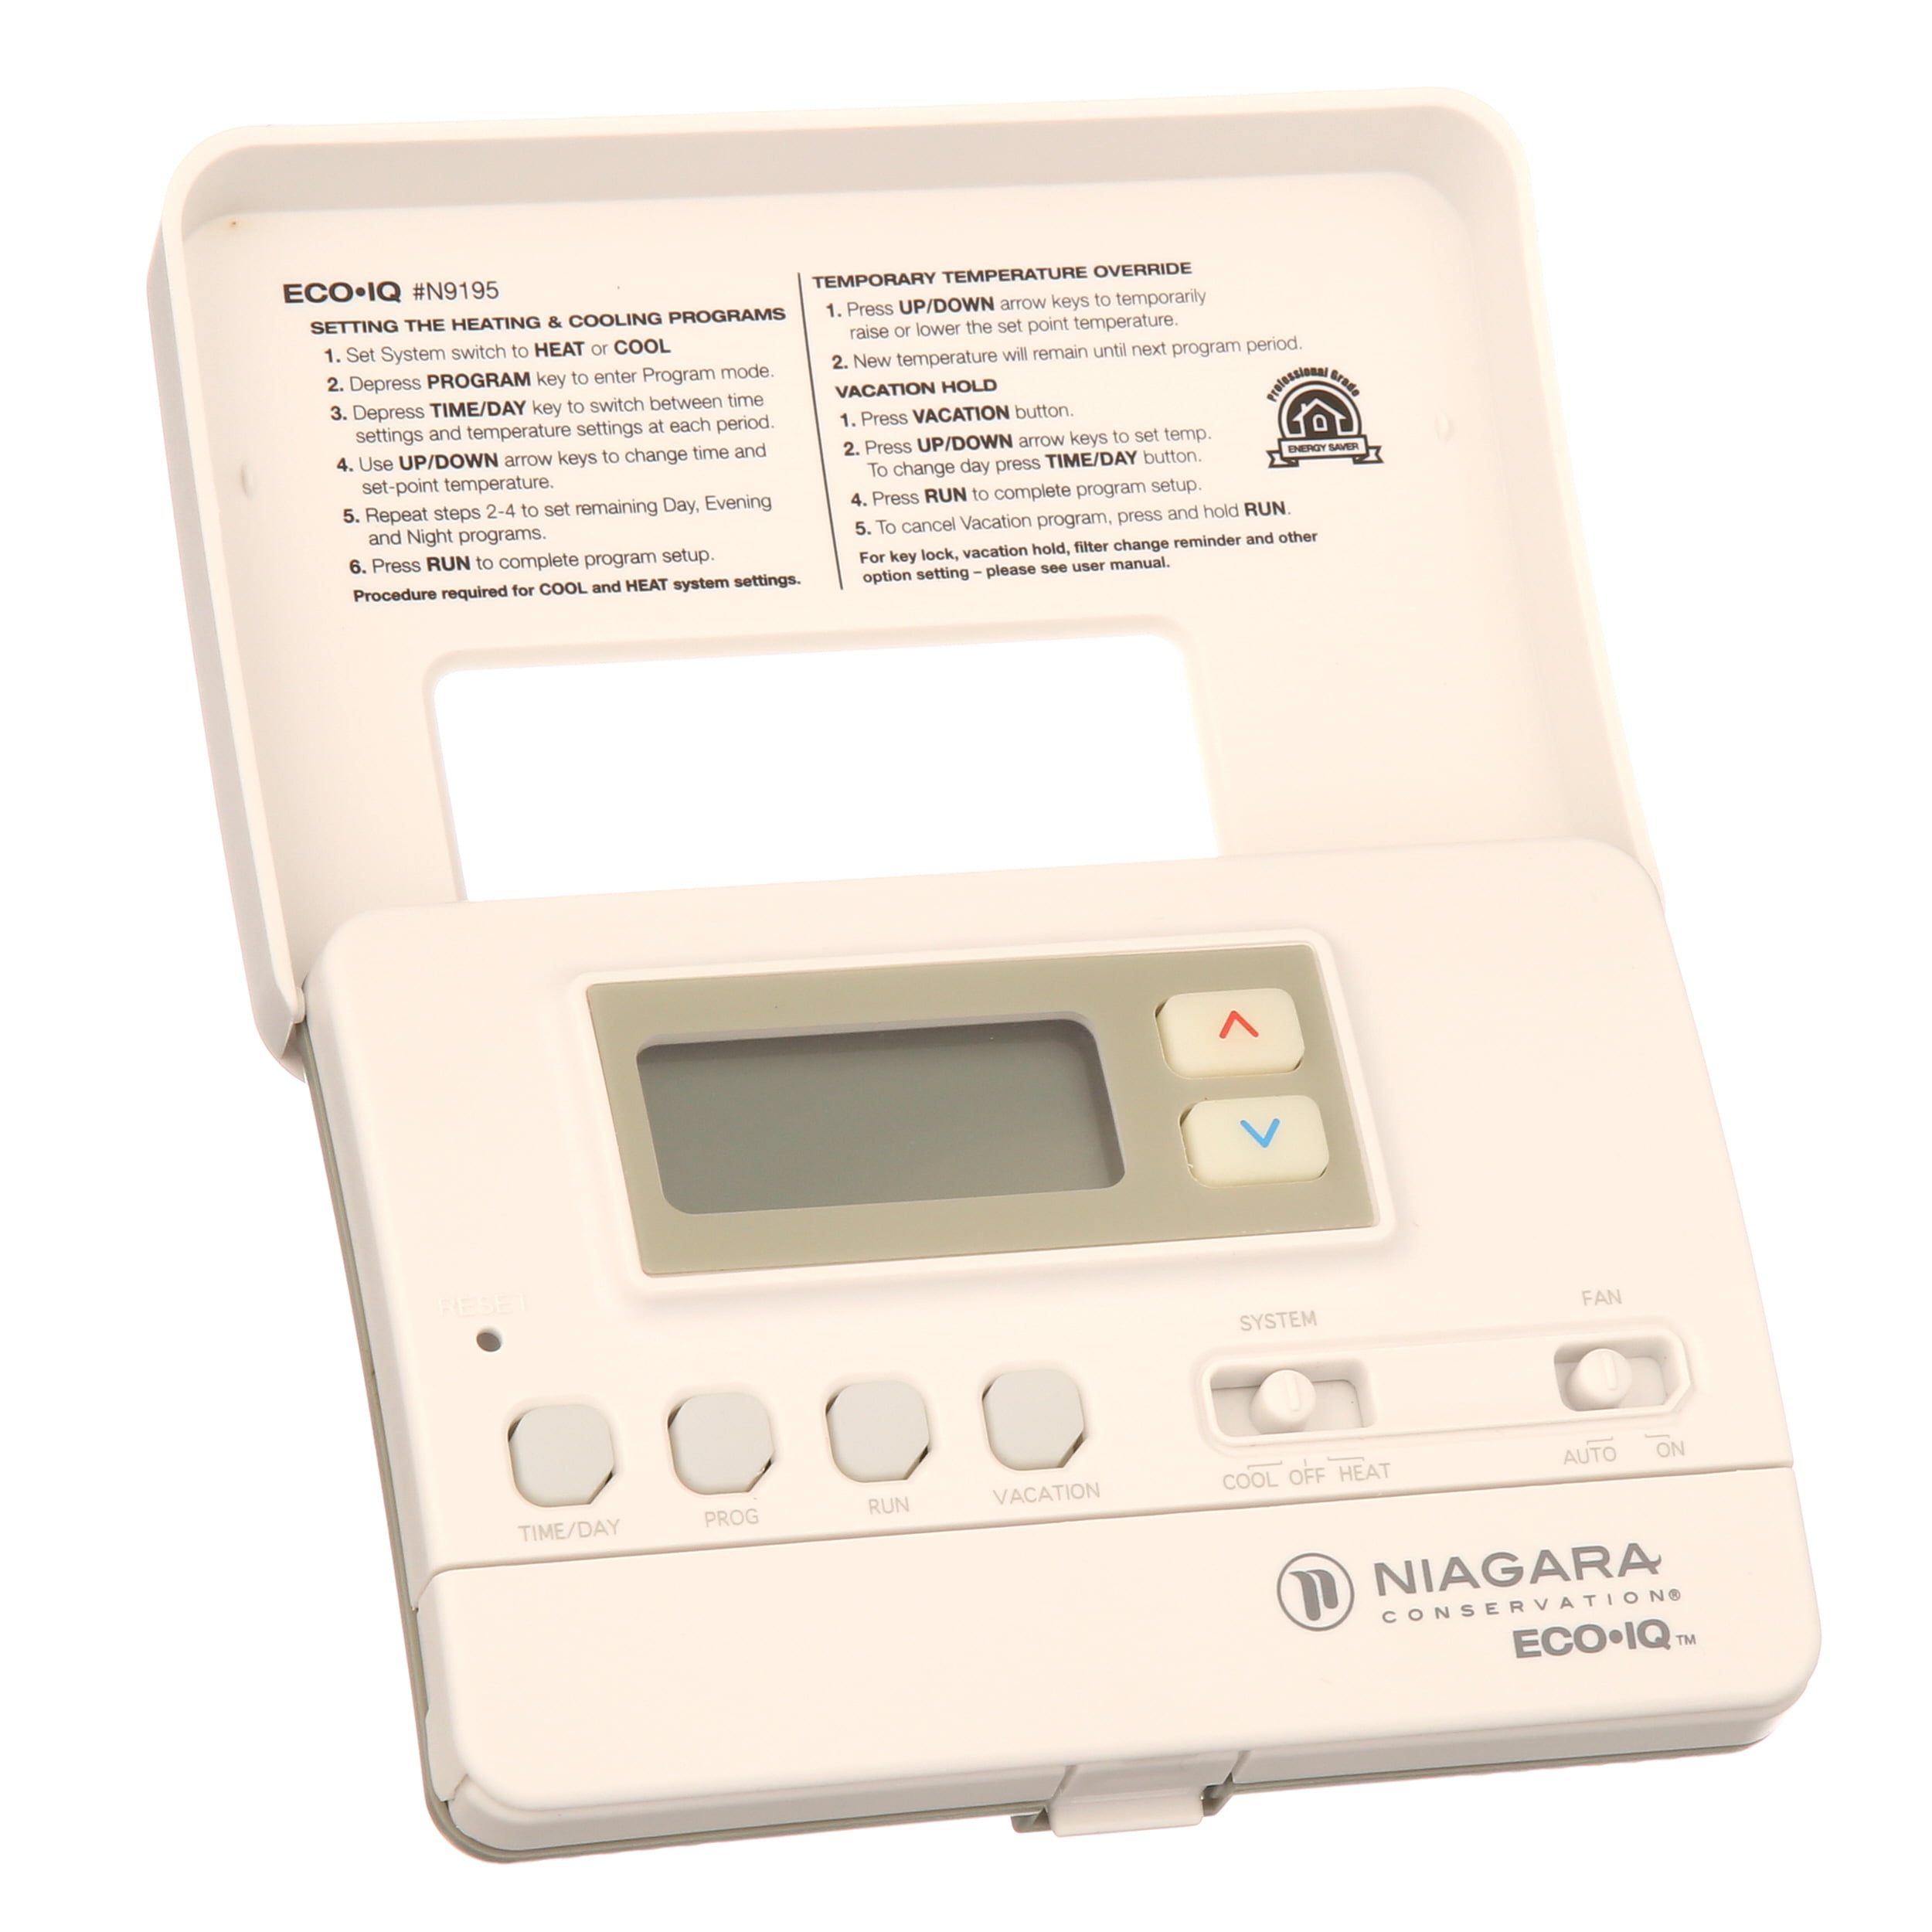 thermostats-programmable-thermostats-new-in-the-box-niagara-n9195-eco